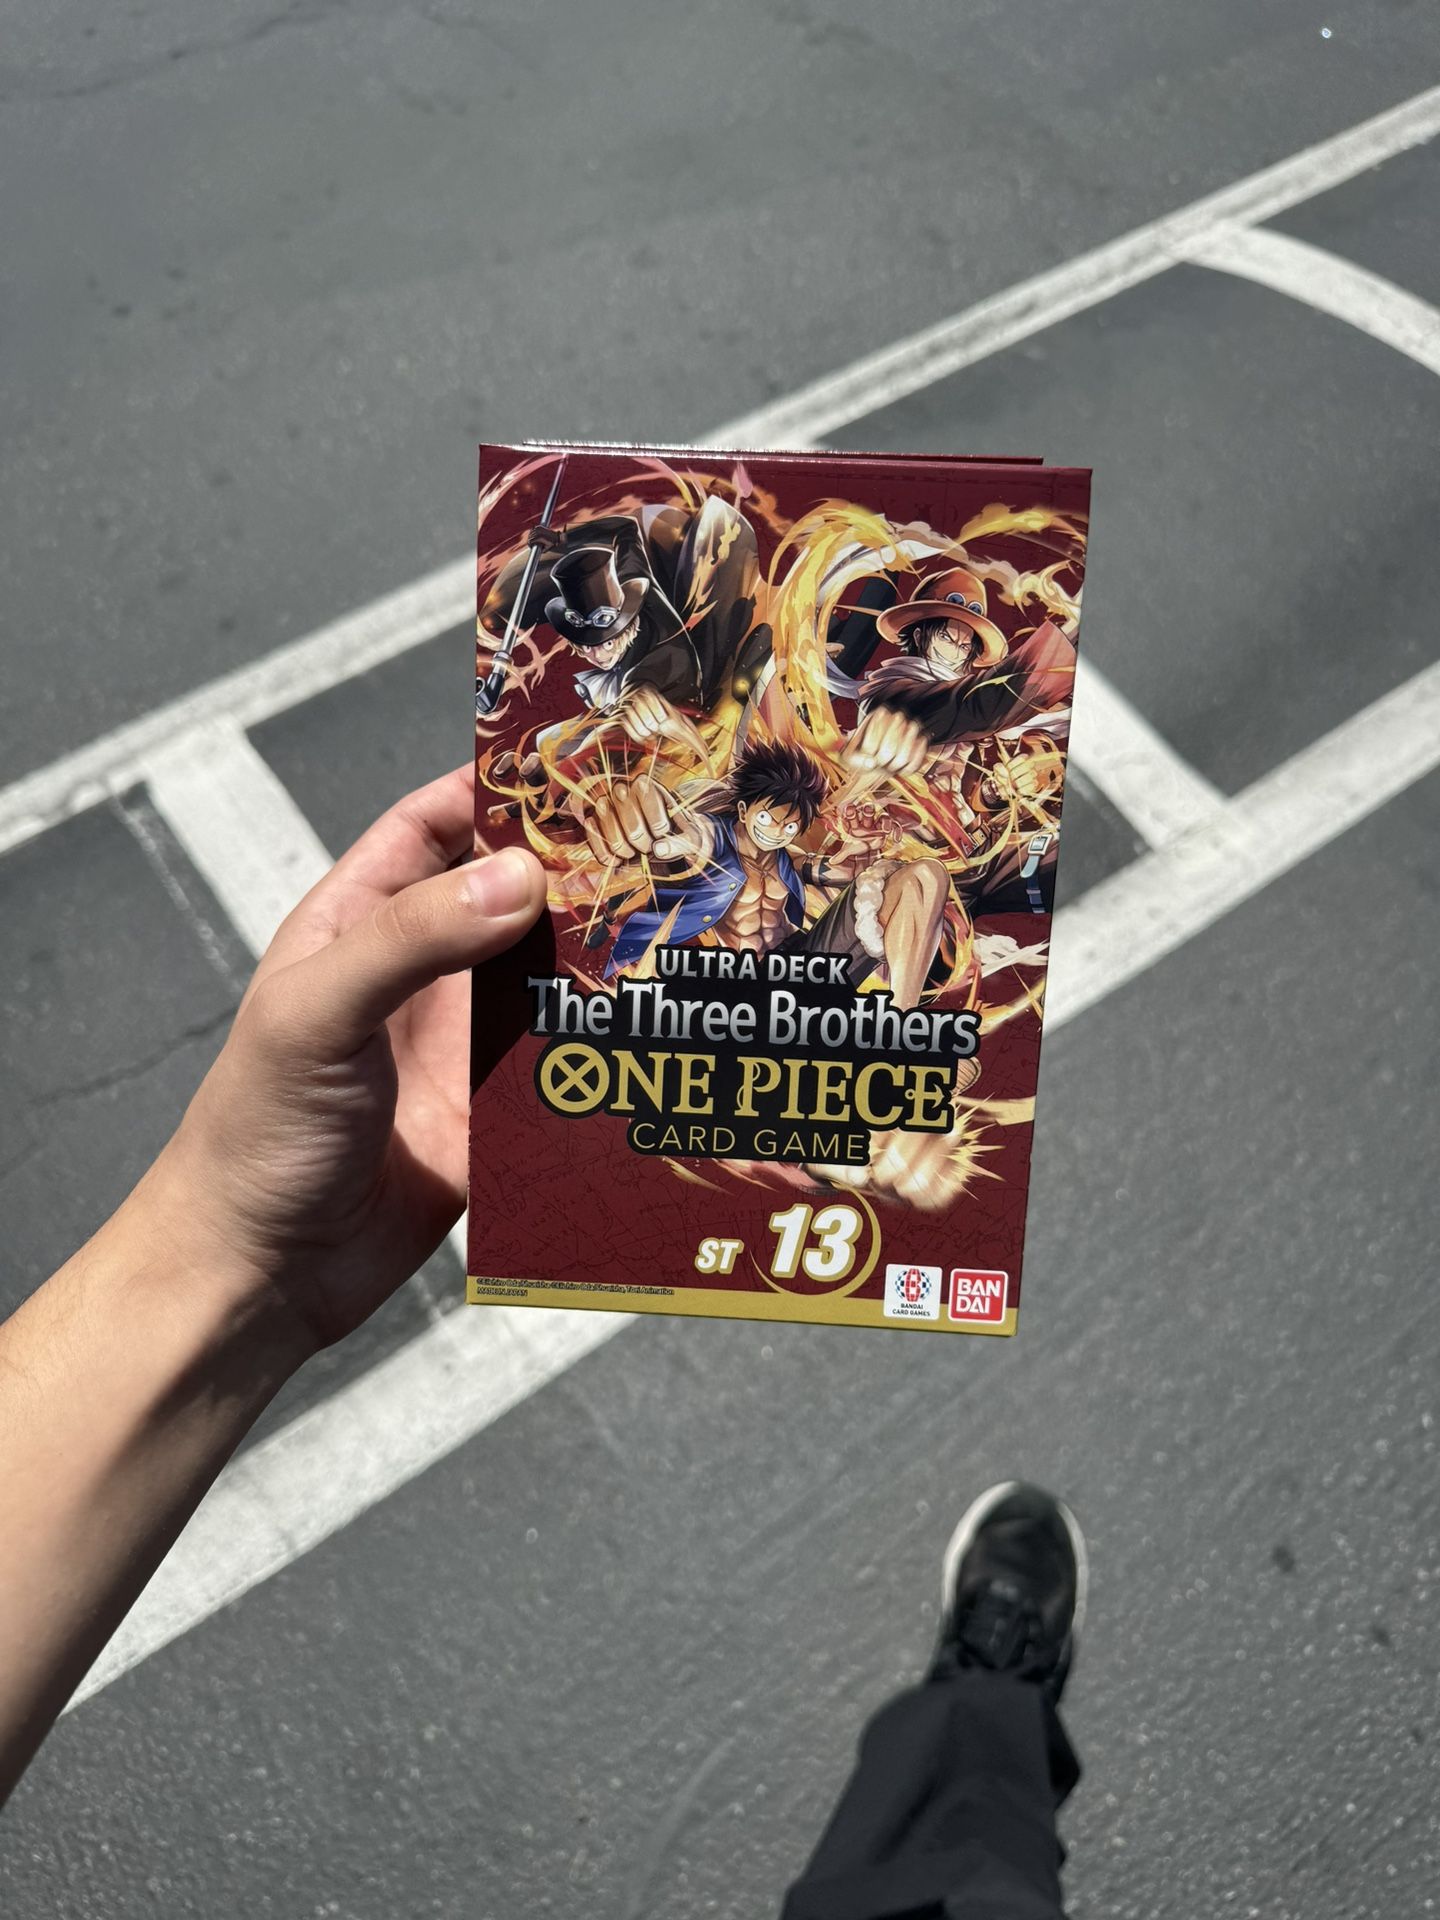 One Piece Three Brothers ST-13 